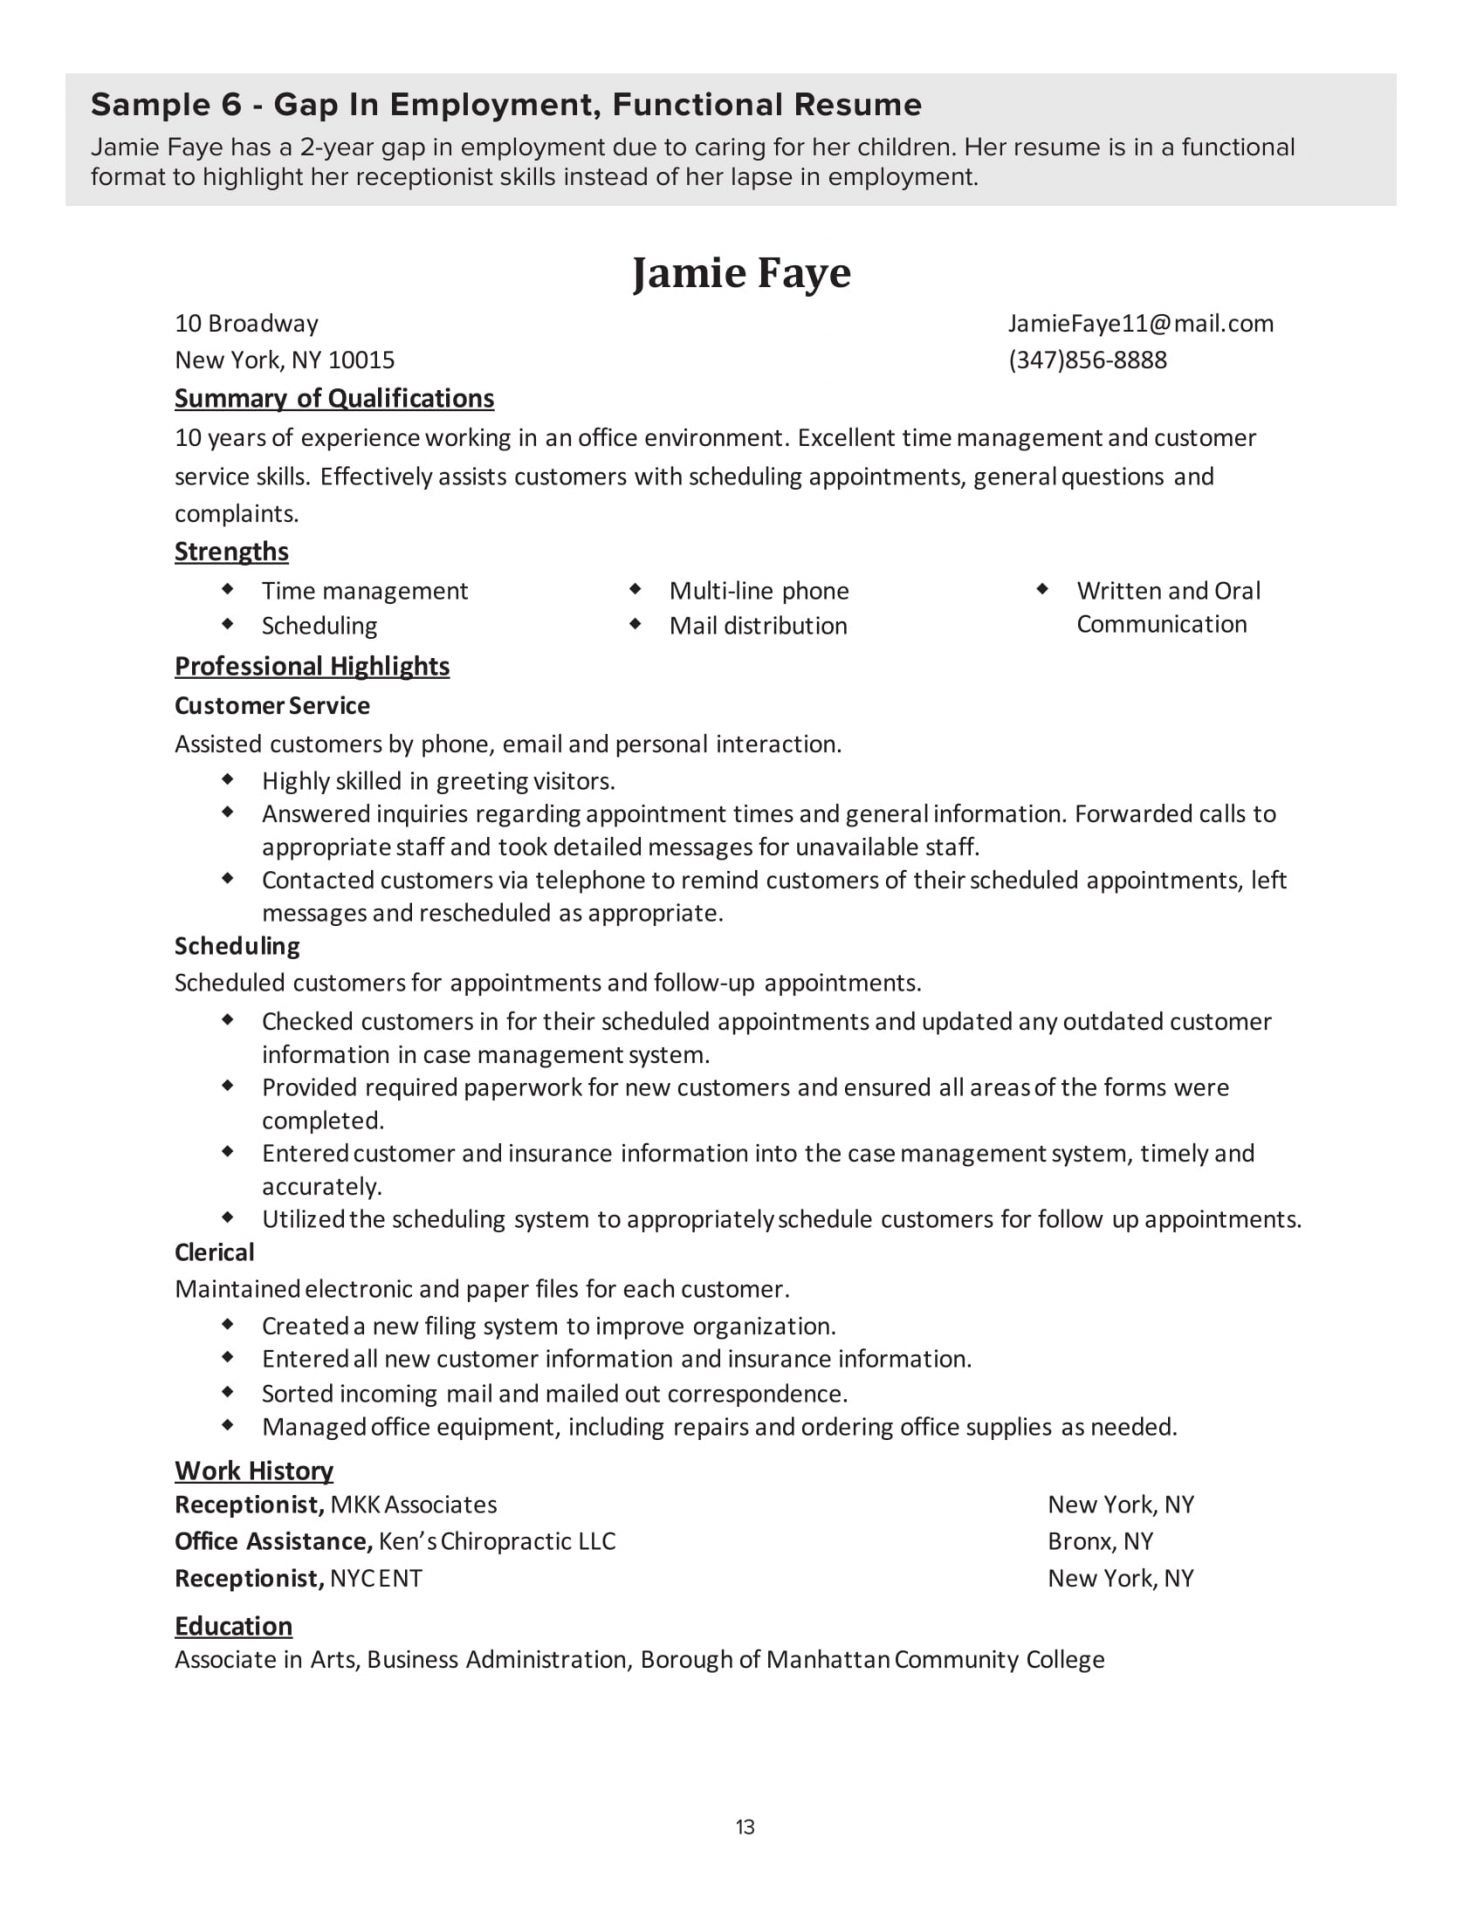 Sample Resume for Accountant with Lapse Sample Inspiring Resumes – Intellectual Point